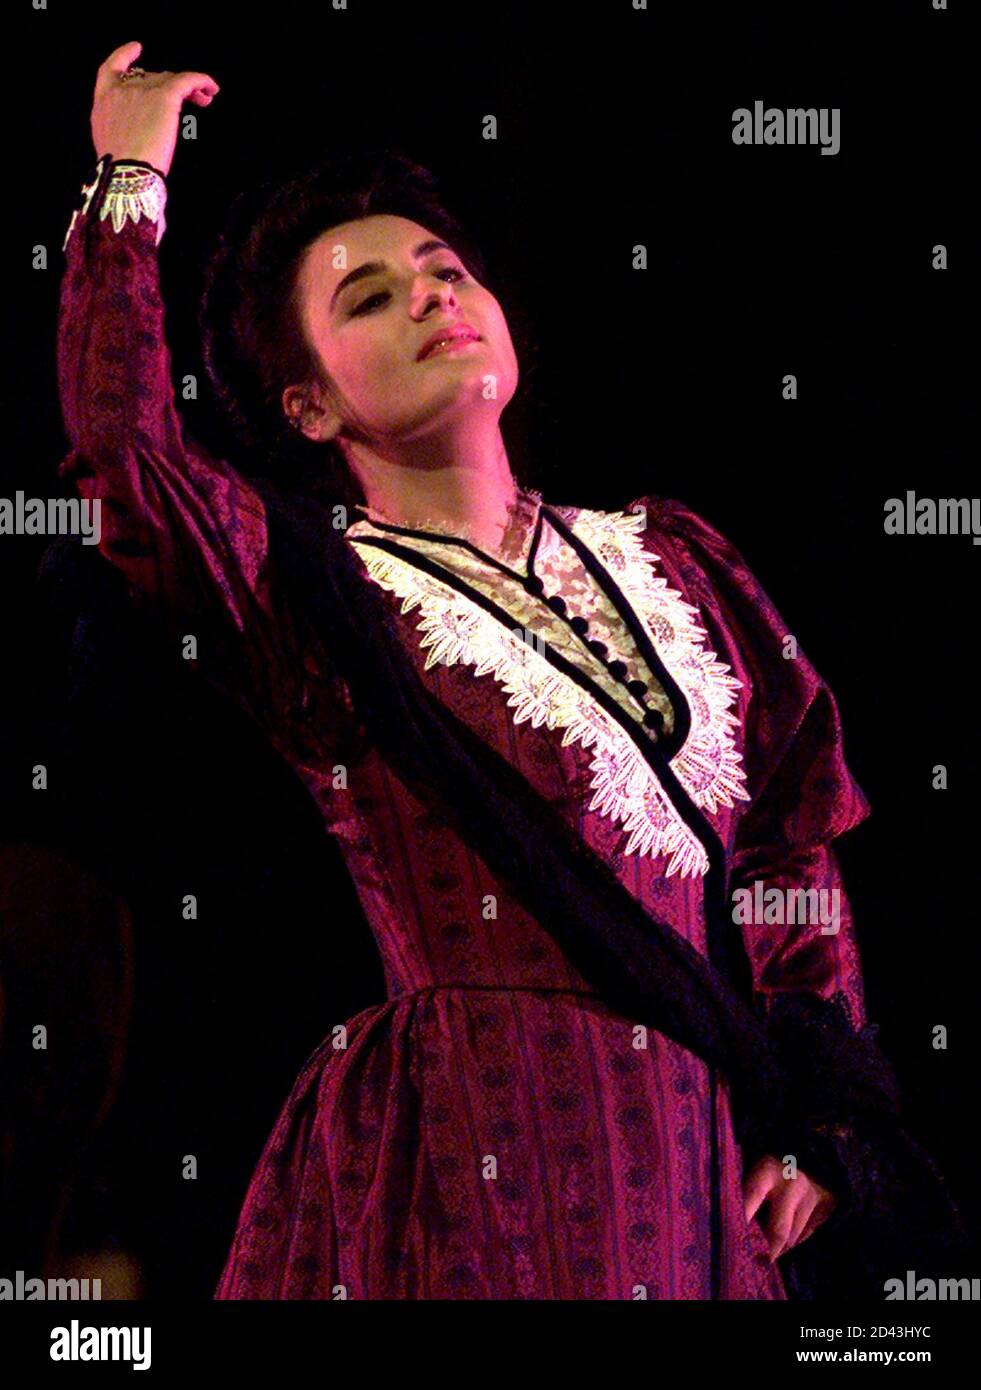 Carmela Remigio performs as " Mrs. Alice Ford" during a dress rehearsal of  Guiseppe Verdi's opera "Falstaff" at the annual Salzburg Festival July 24,  2001. The first night of the play is